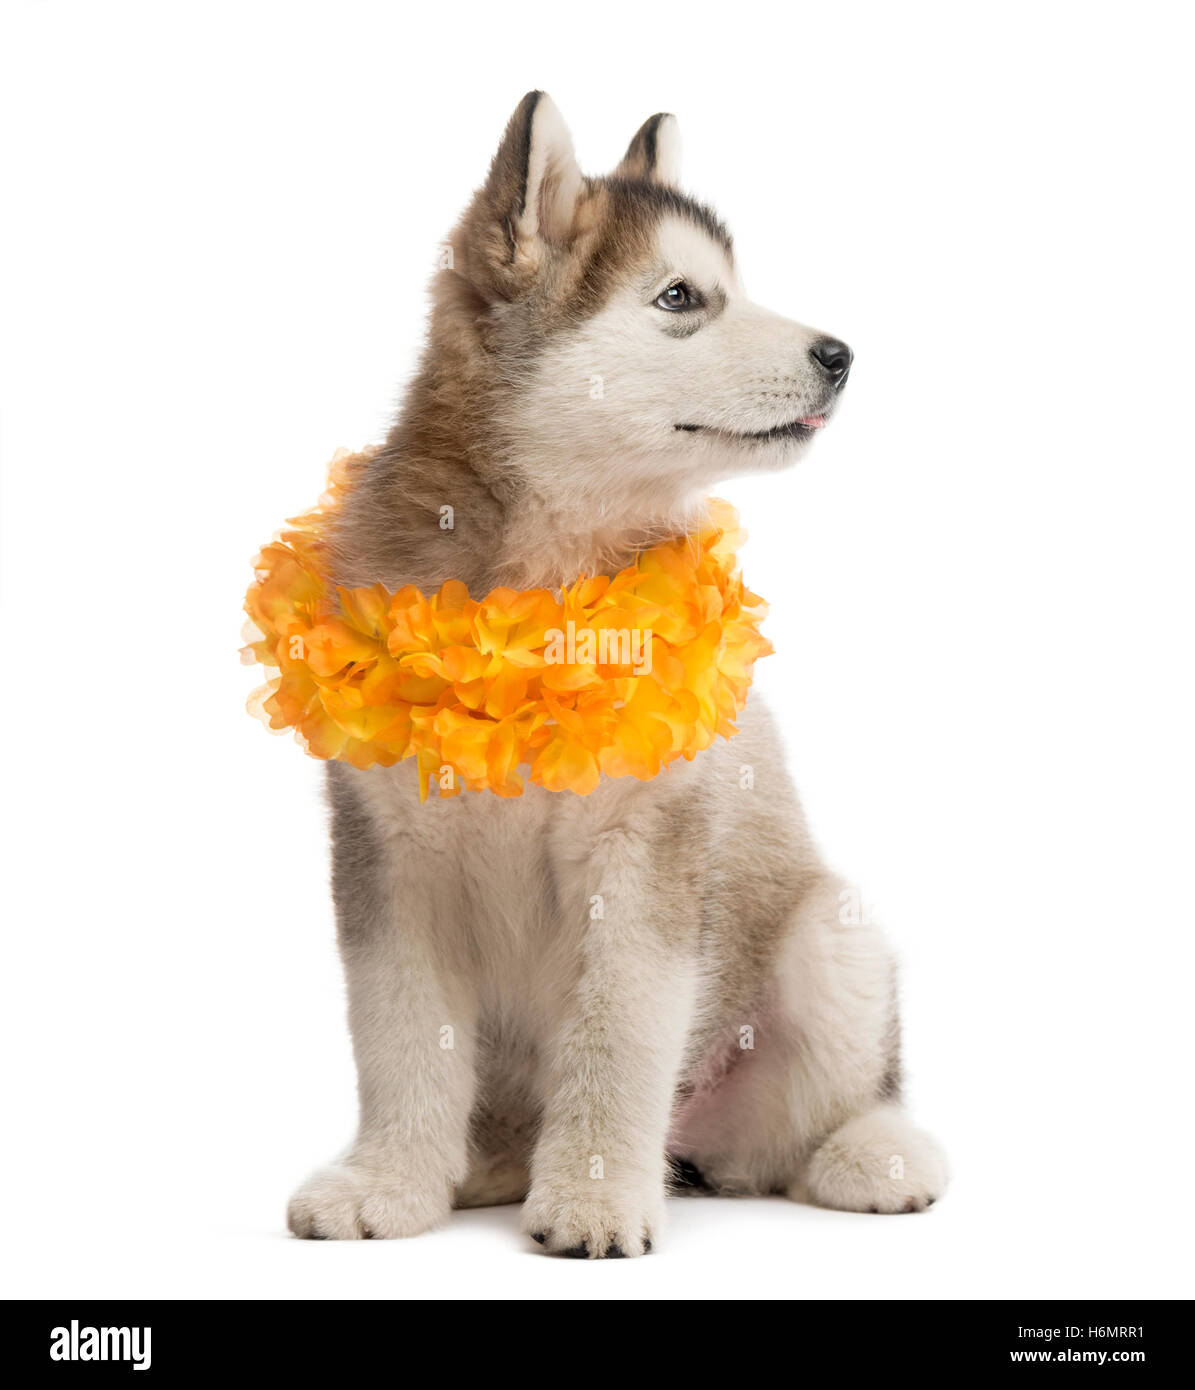 Alaskan Malamute puppy sitting and wearing a yellow collar isolated on white Stock Photo